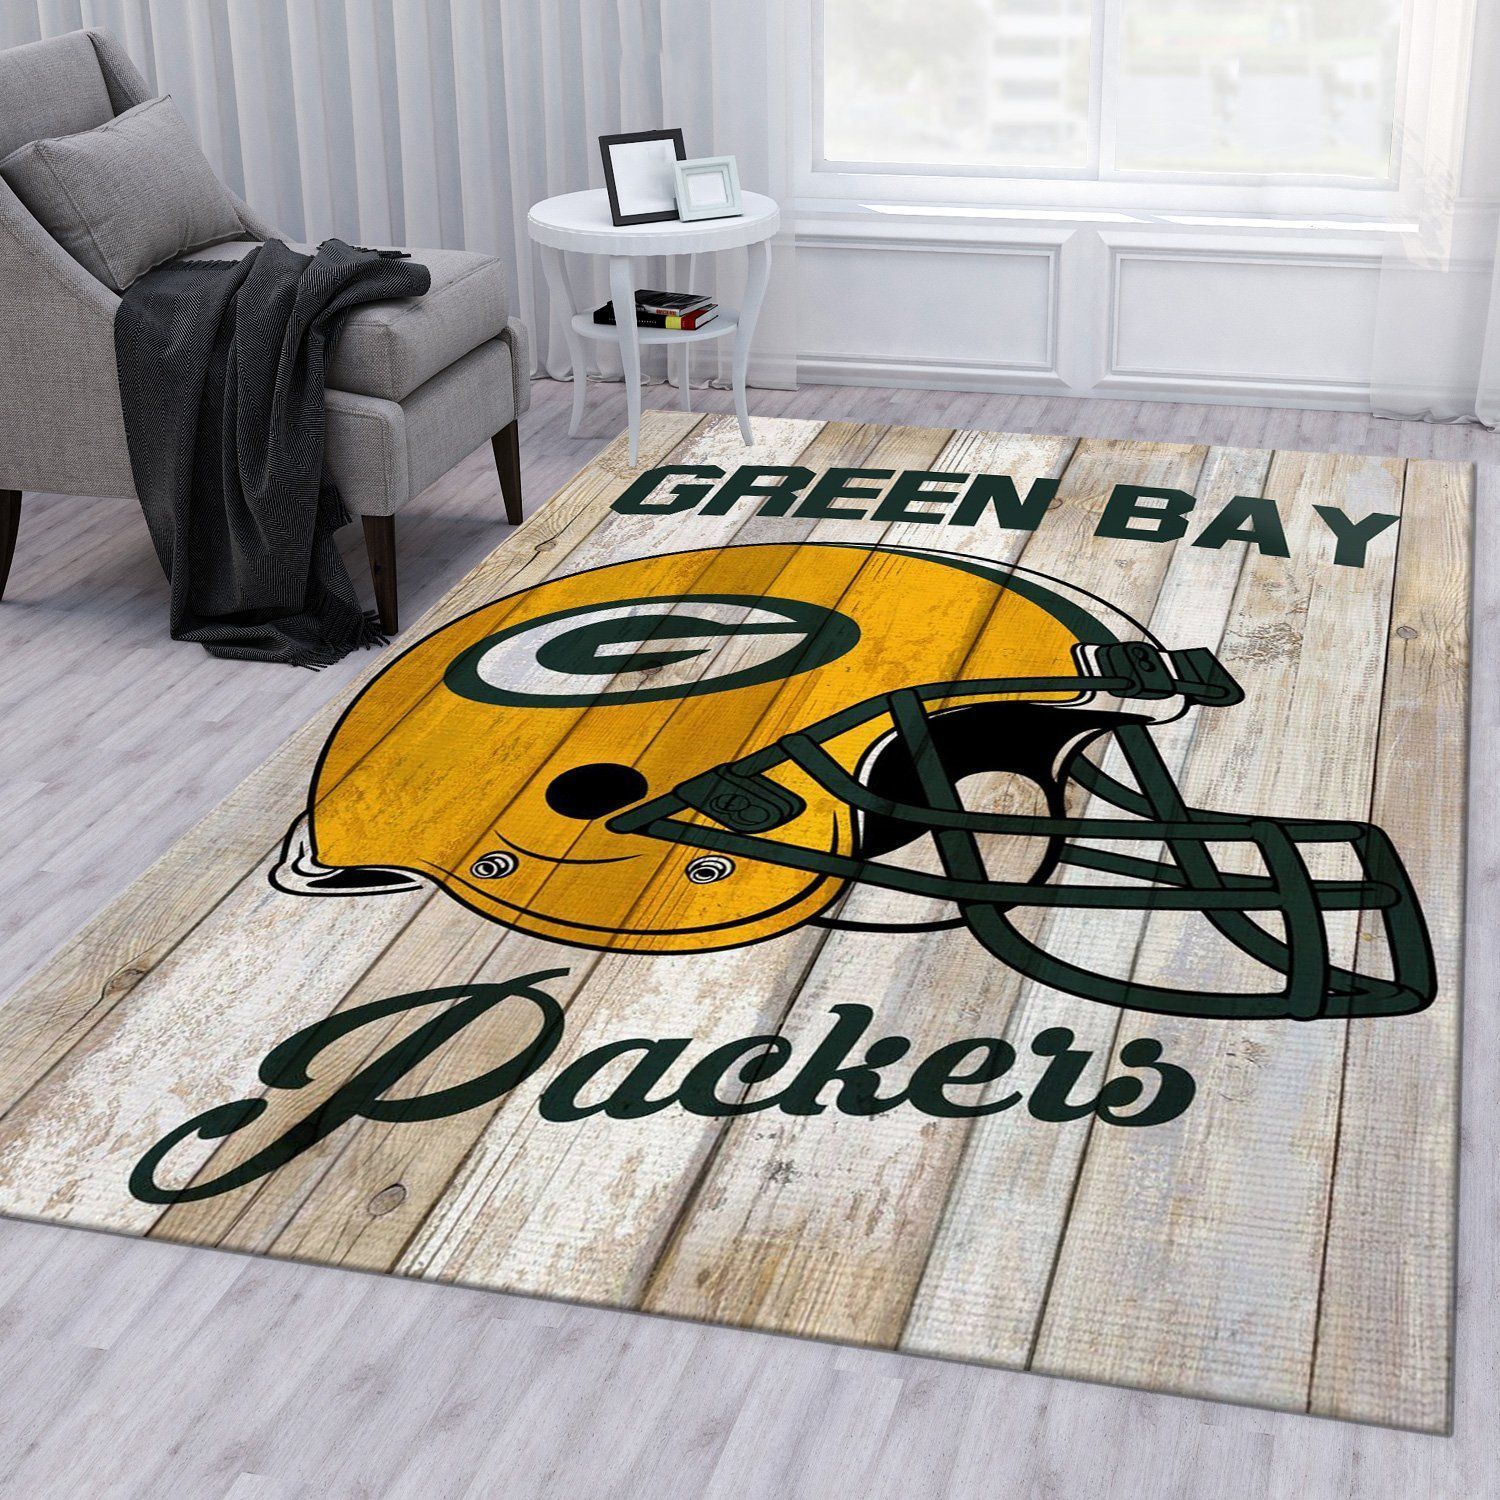 Green Bay Packers Football Nfl Area Rug Living Room Rug Home US Decor - Indoor Outdoor Rugs